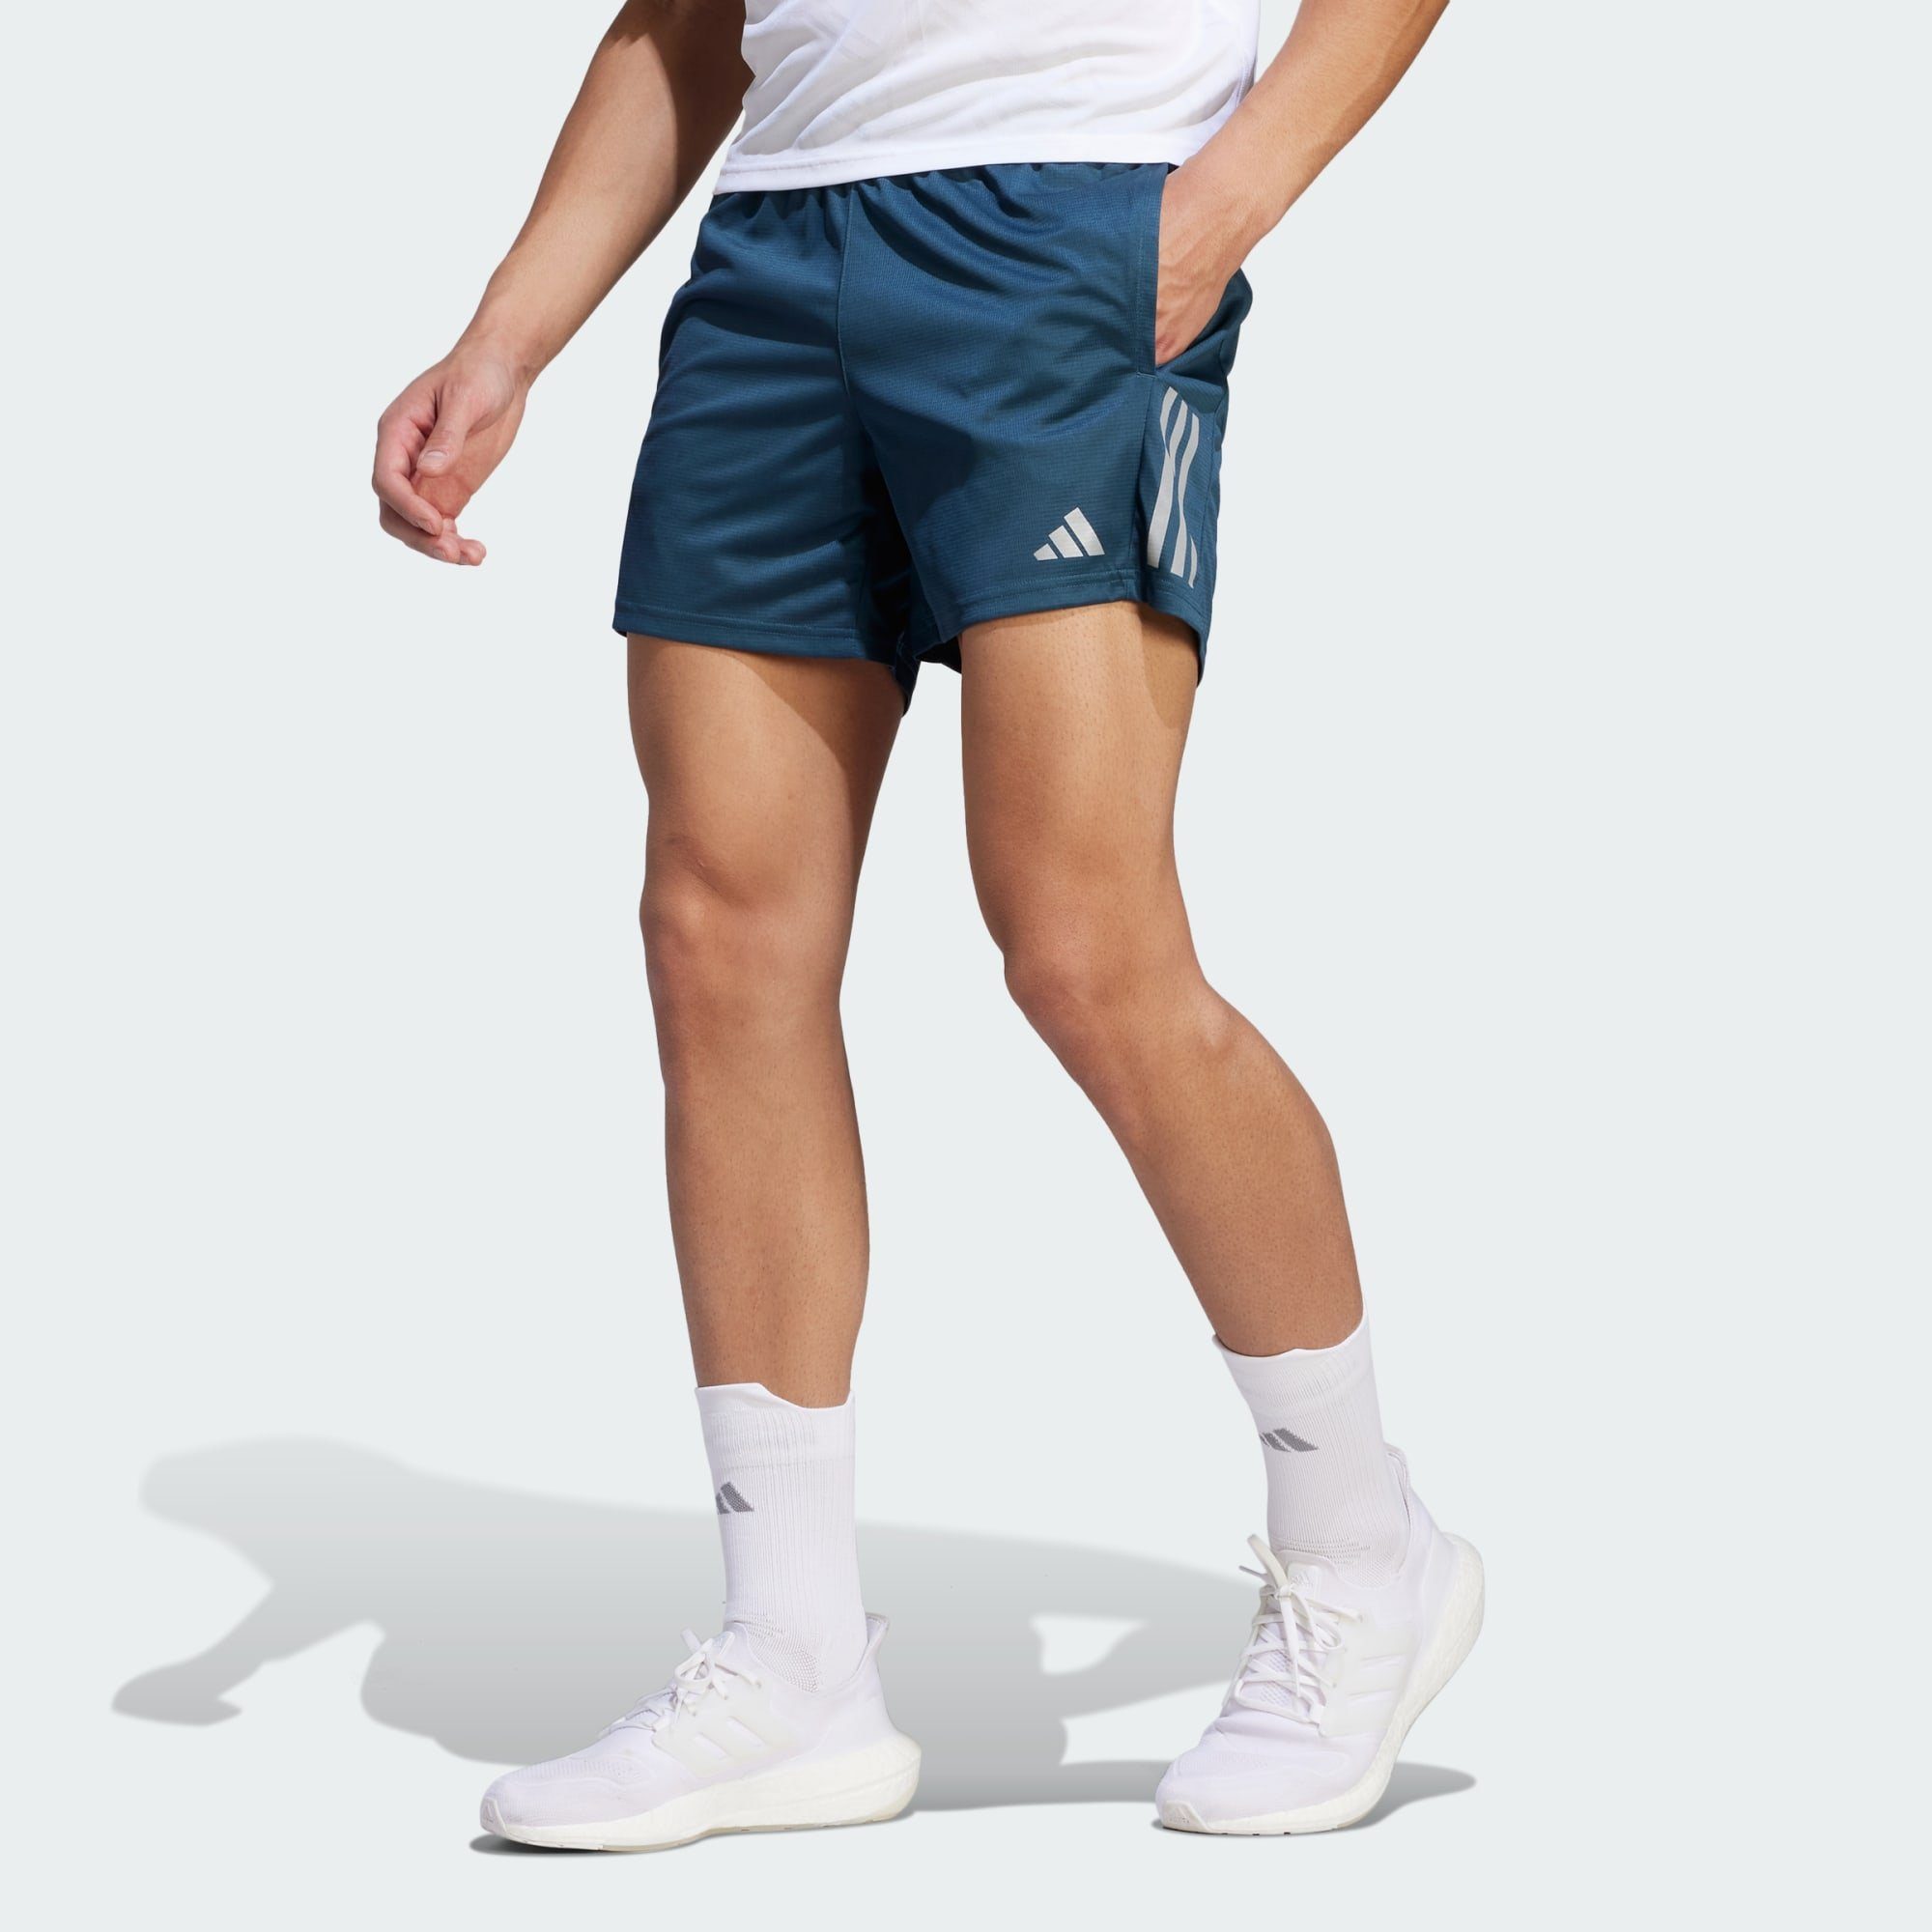 SHORTS THE MEASURED OWN adidas RUN Laufshorts CARBON Performance